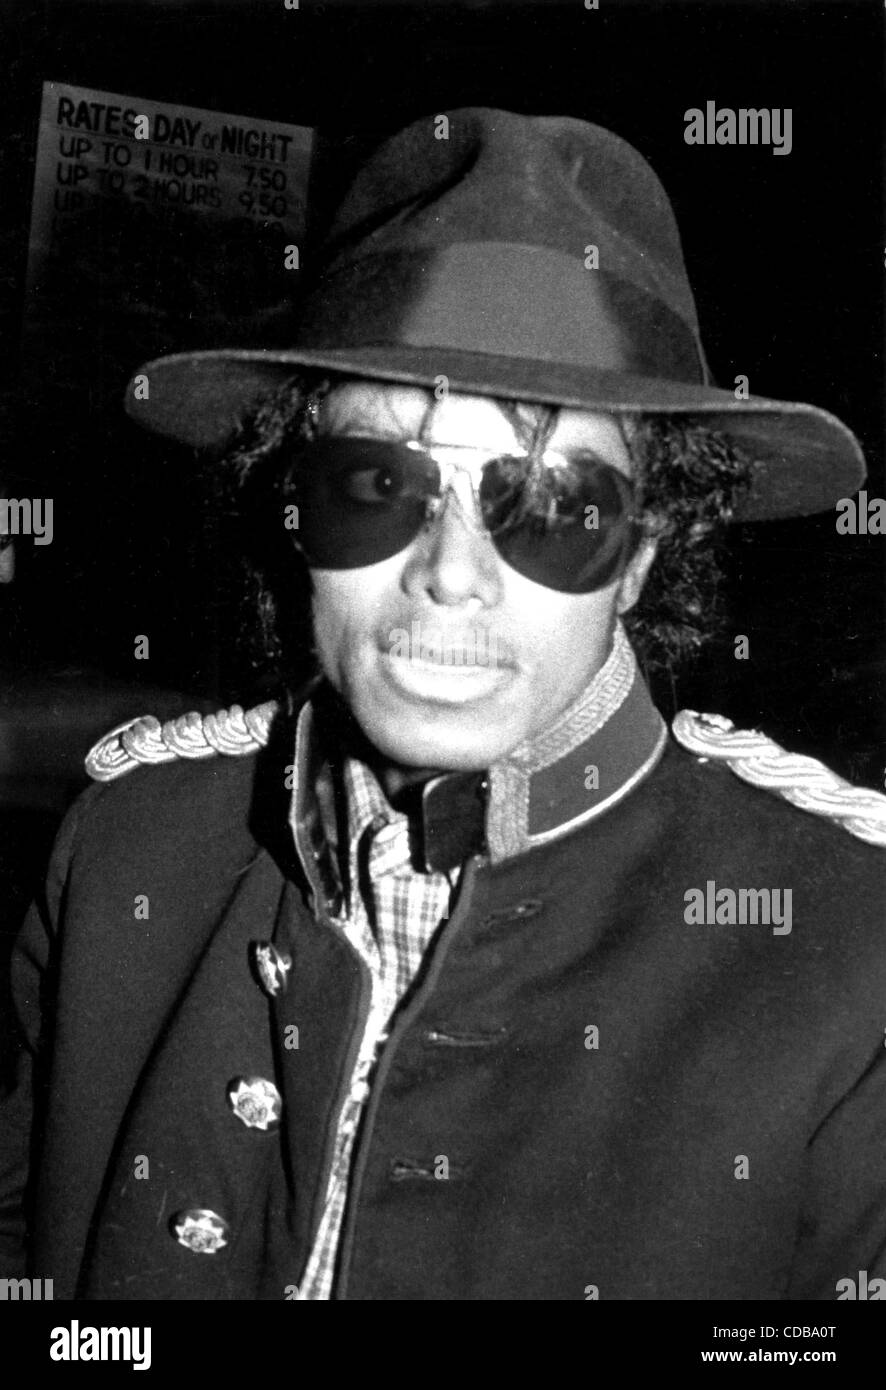 Michael Jackson Arriving At Manhattan S Museum Of Natural History For The Party That Cbs Records Threw In His Honor Ny1197 A A C Michaeljacksonretro Credit Image A C Judie Burstein Globe Photos Zumapress Com Stock Photo Alamy